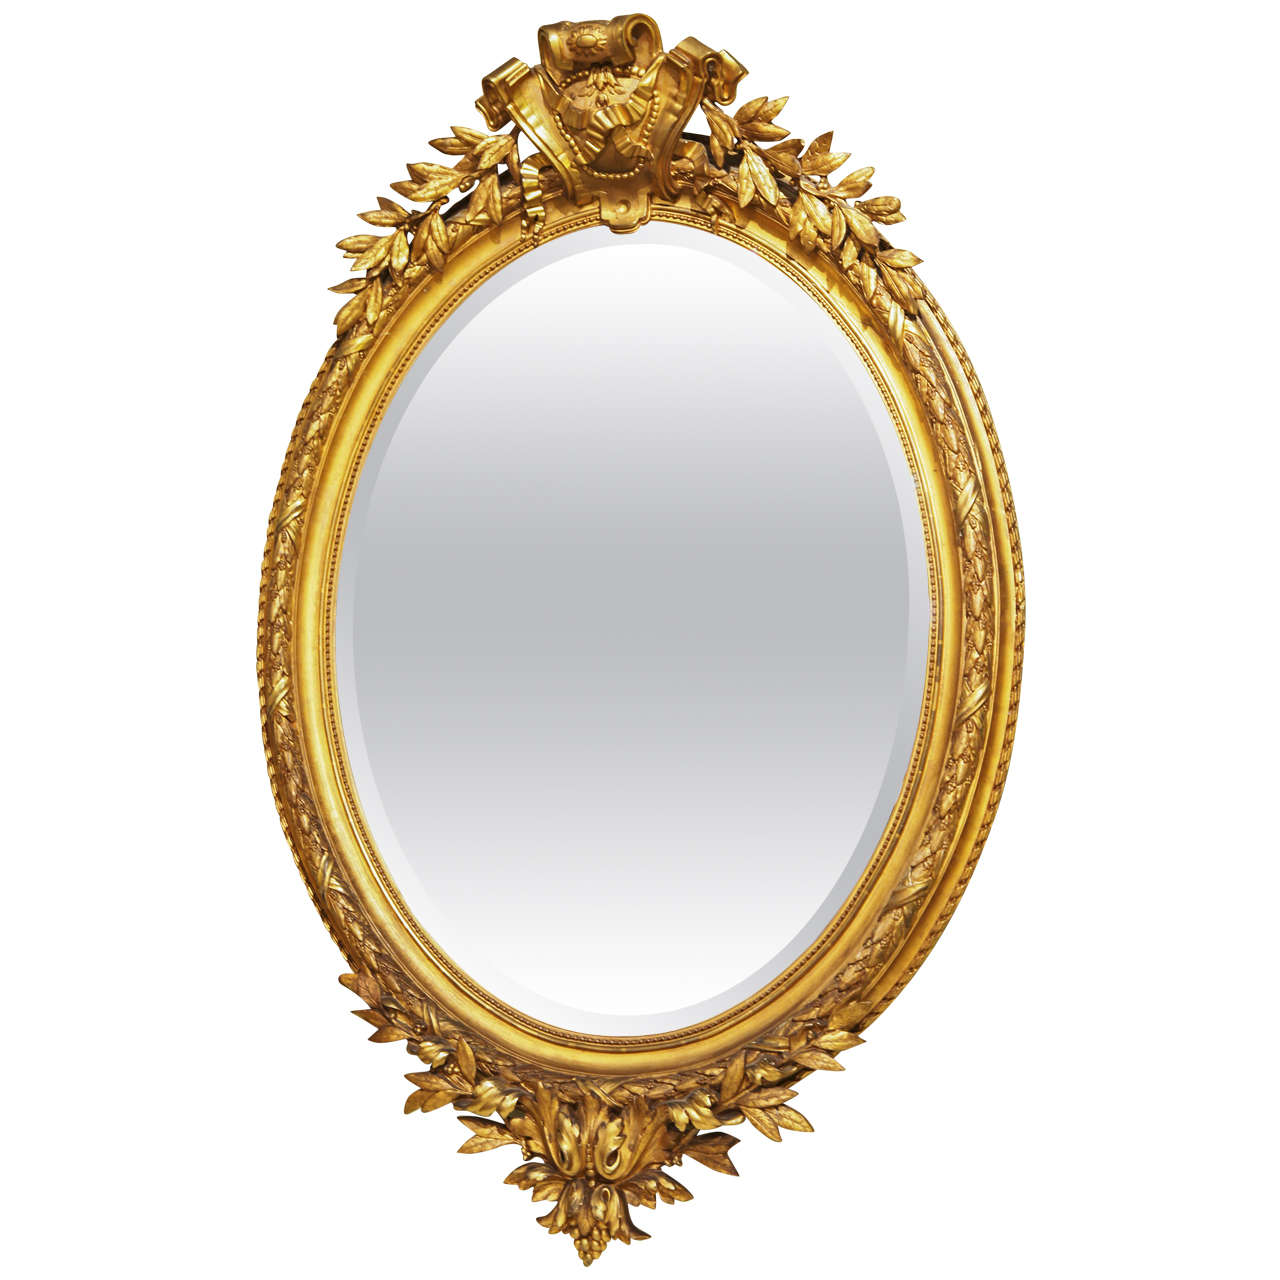 19th Century French Large Louis XVI Gilt Carved Oval Mirror